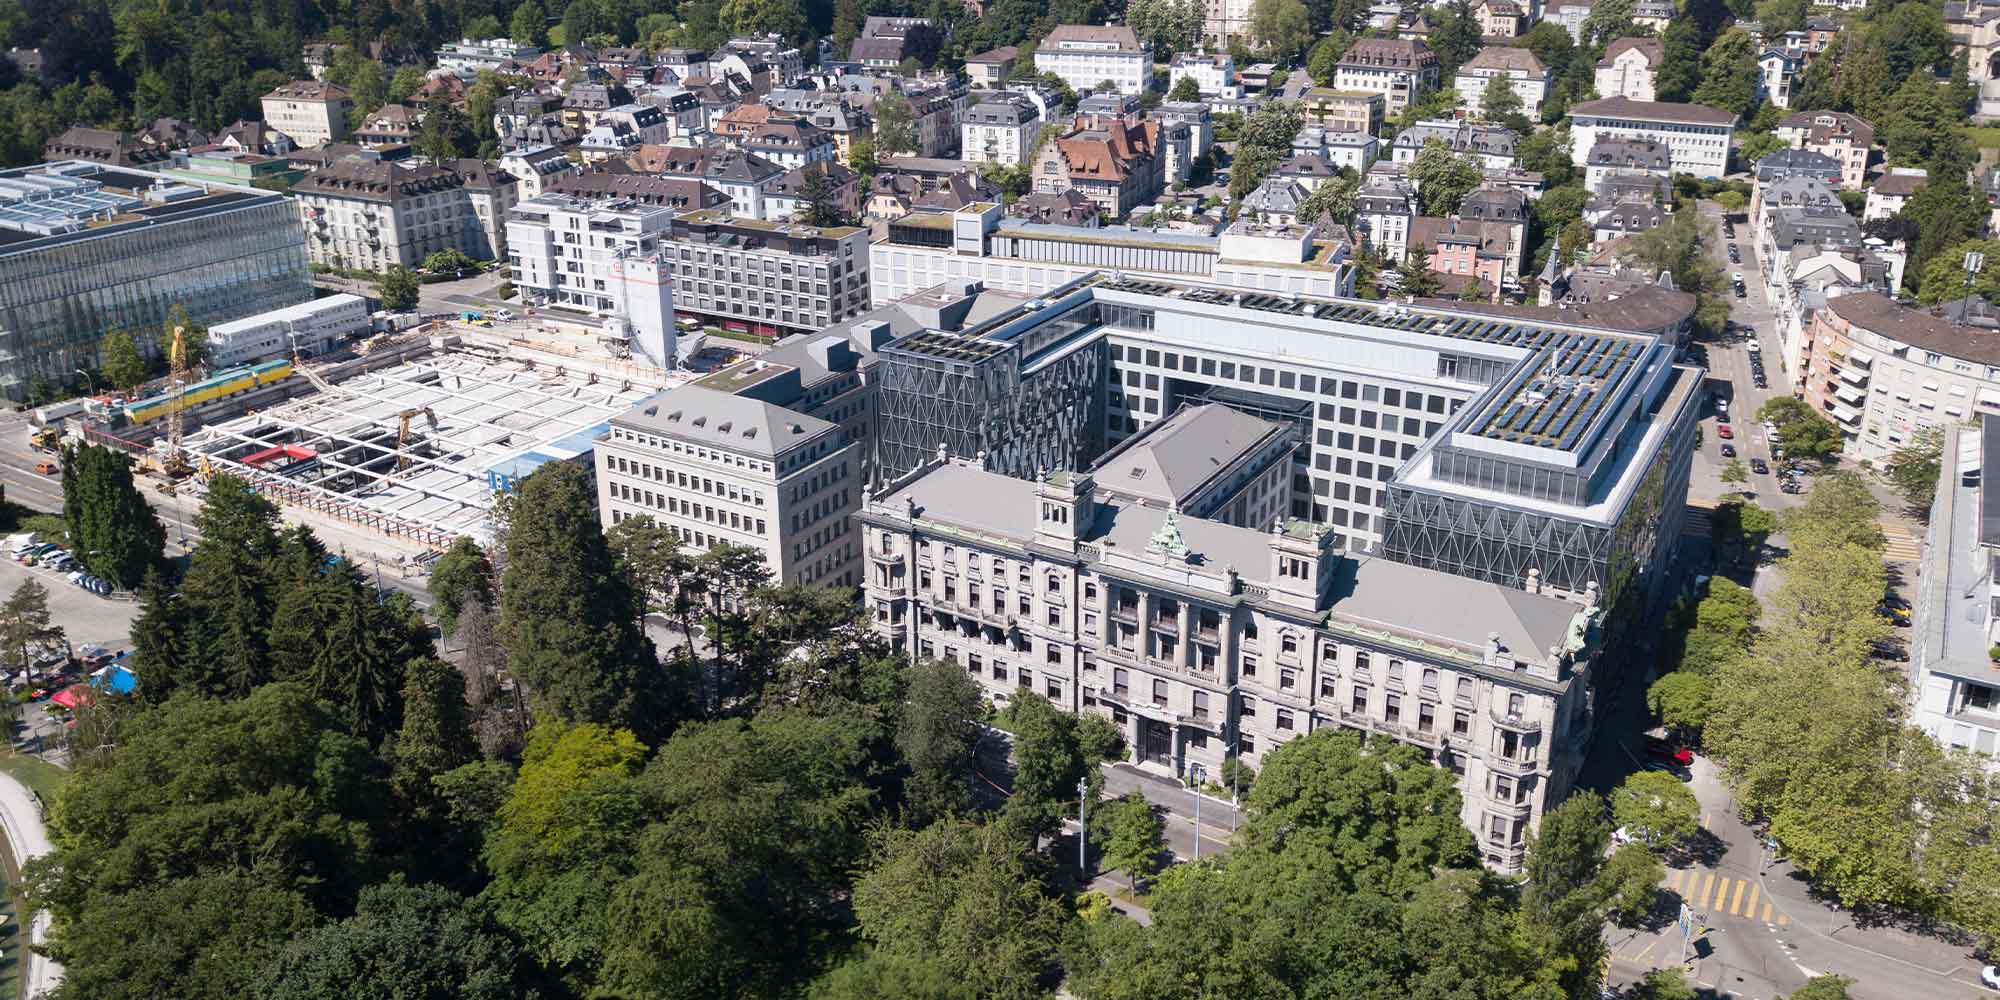 Quai Zurich Campus seen from the sky